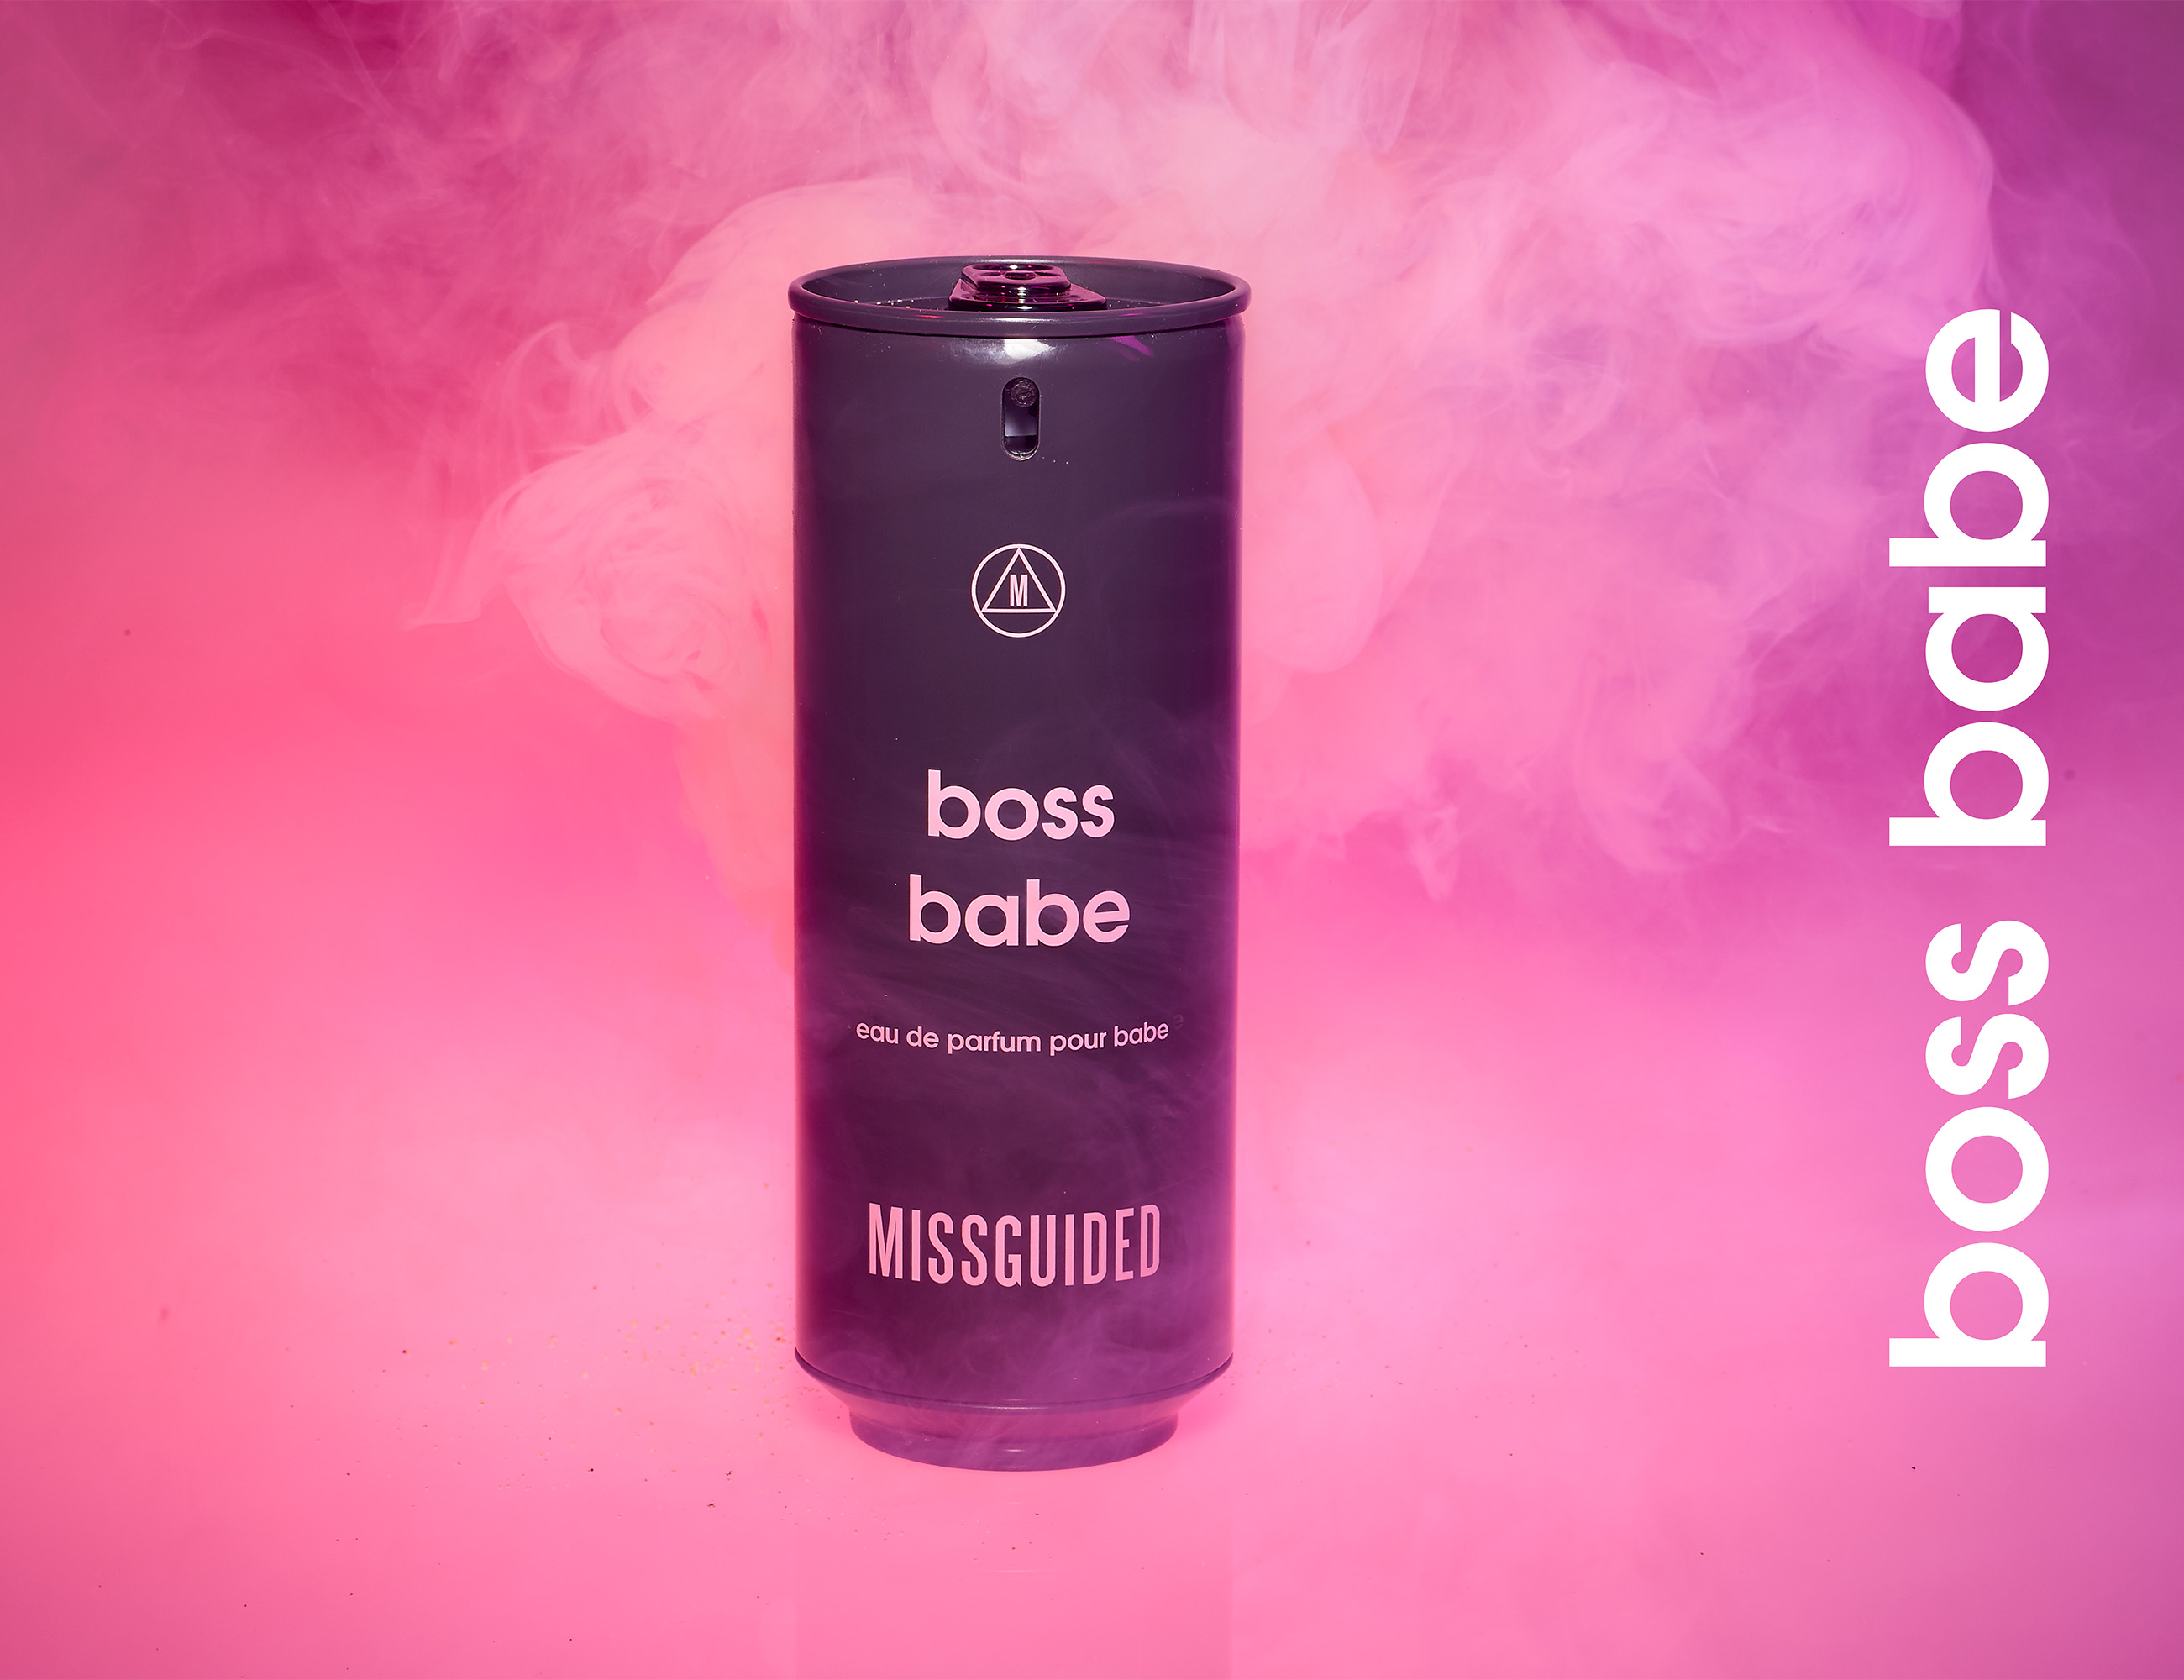 boss babe missguided perfume